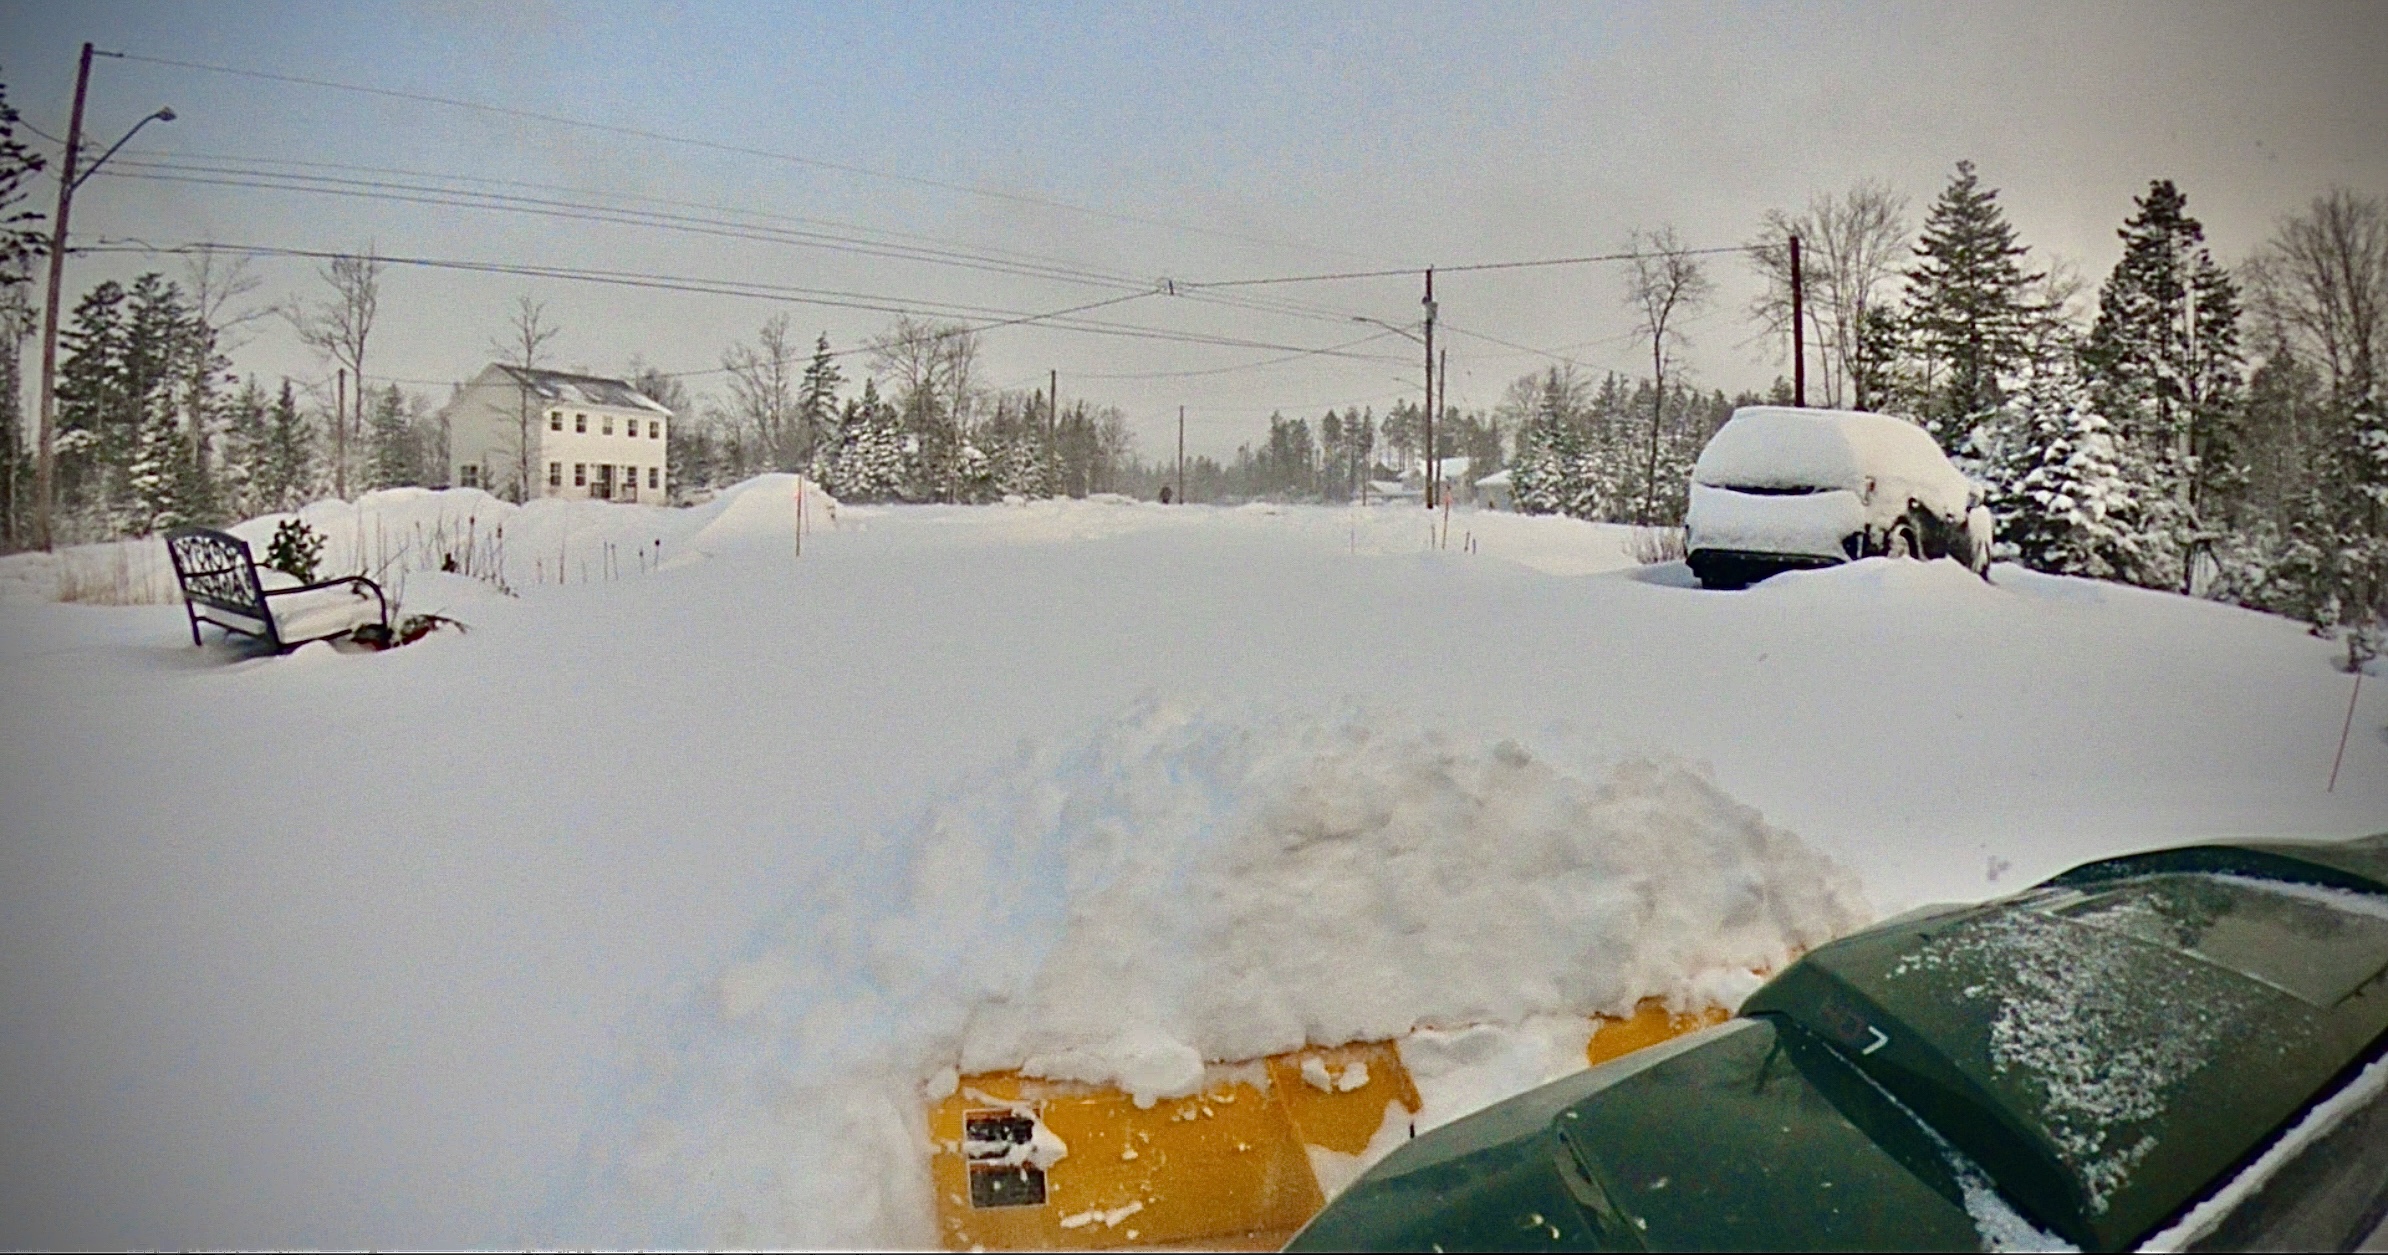 Brace the Snowstorm: My First Time Plowing With Can-Am Defender Promount Snow Plow